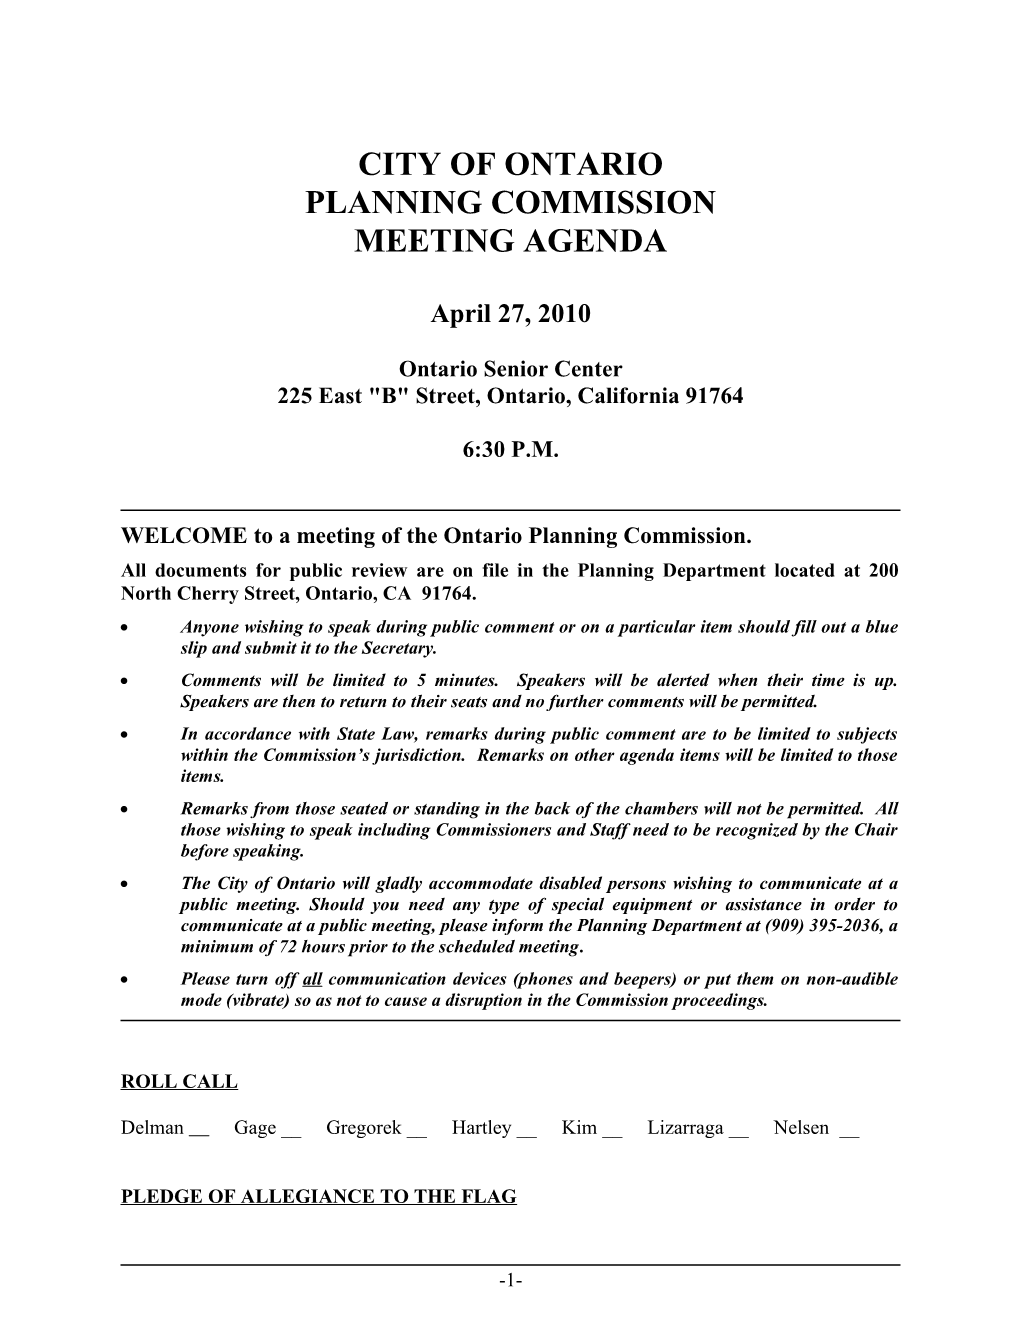 CITY of ONTARIO PLANNING COMMISSION April 27, 2010